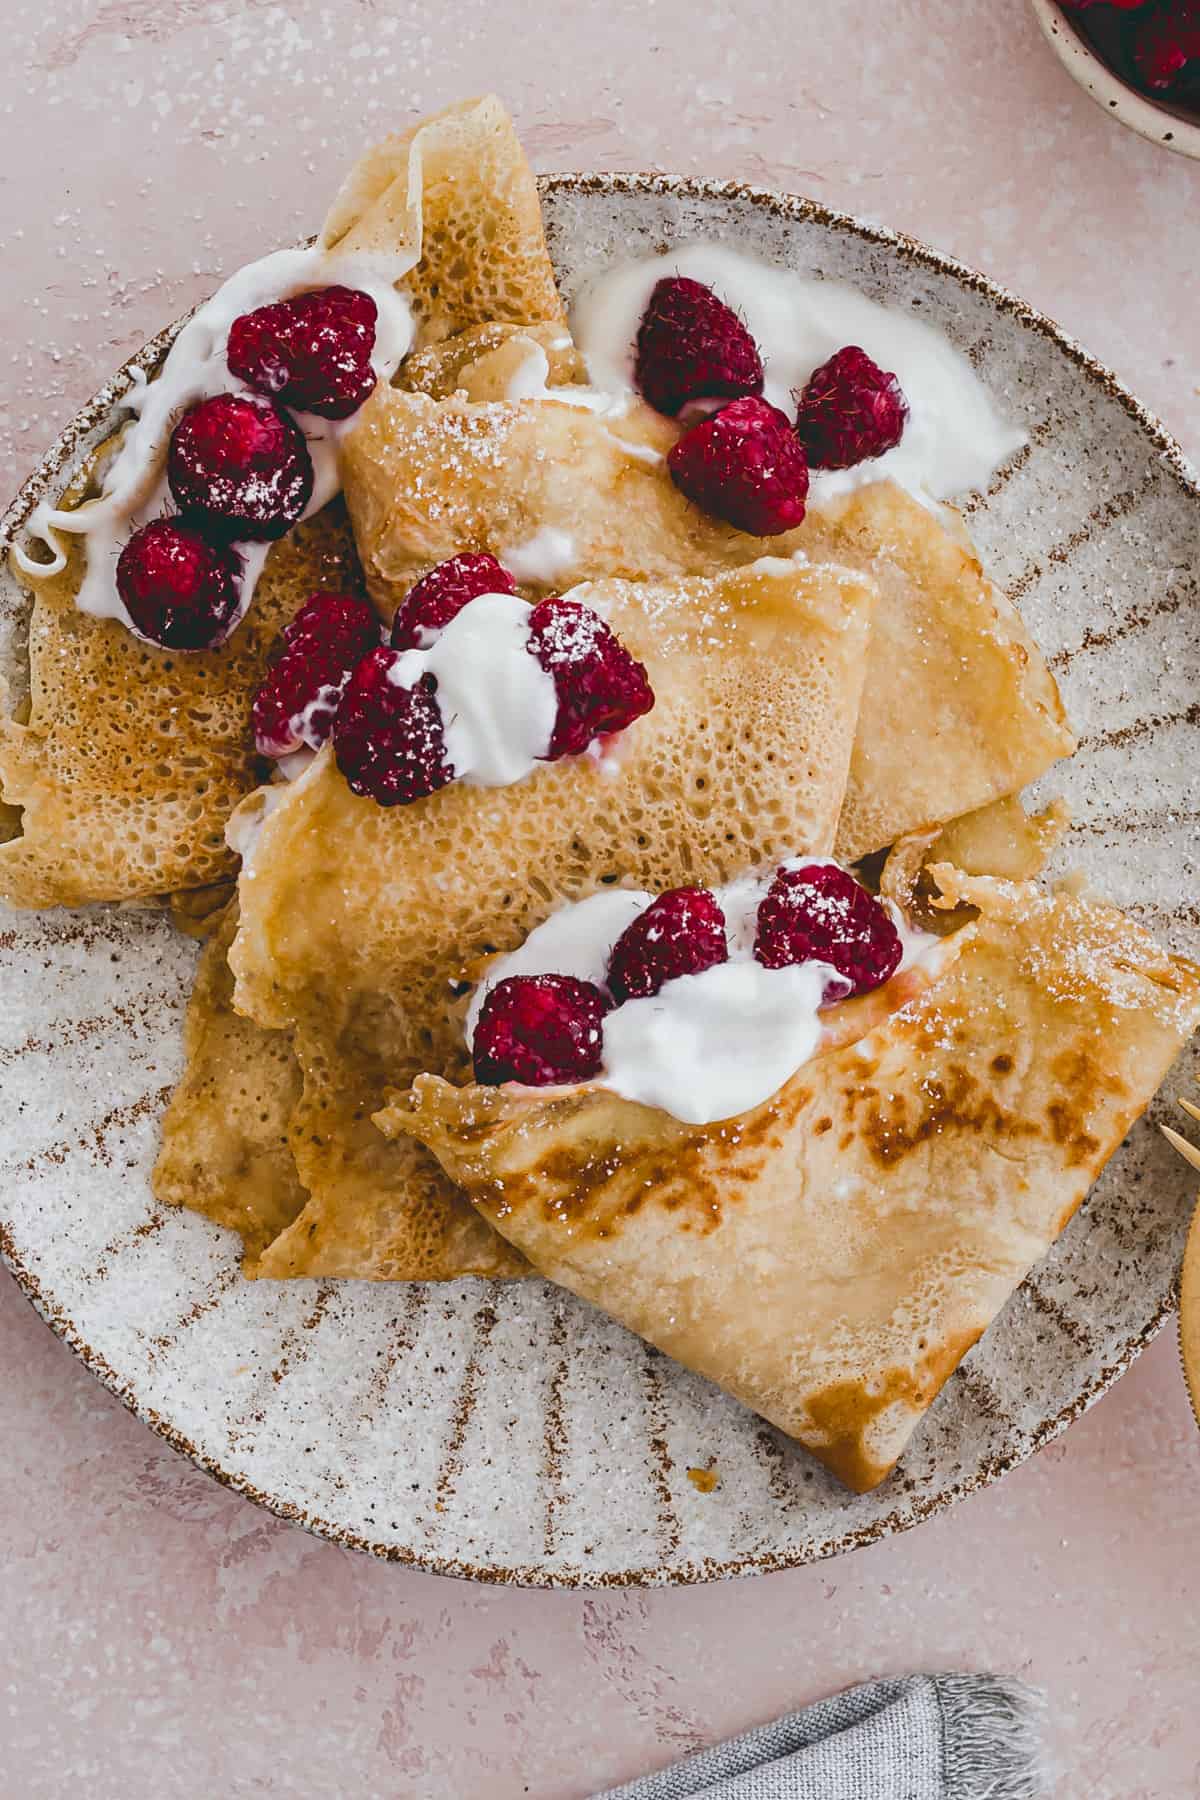 crepes served with powdered sugar and berries